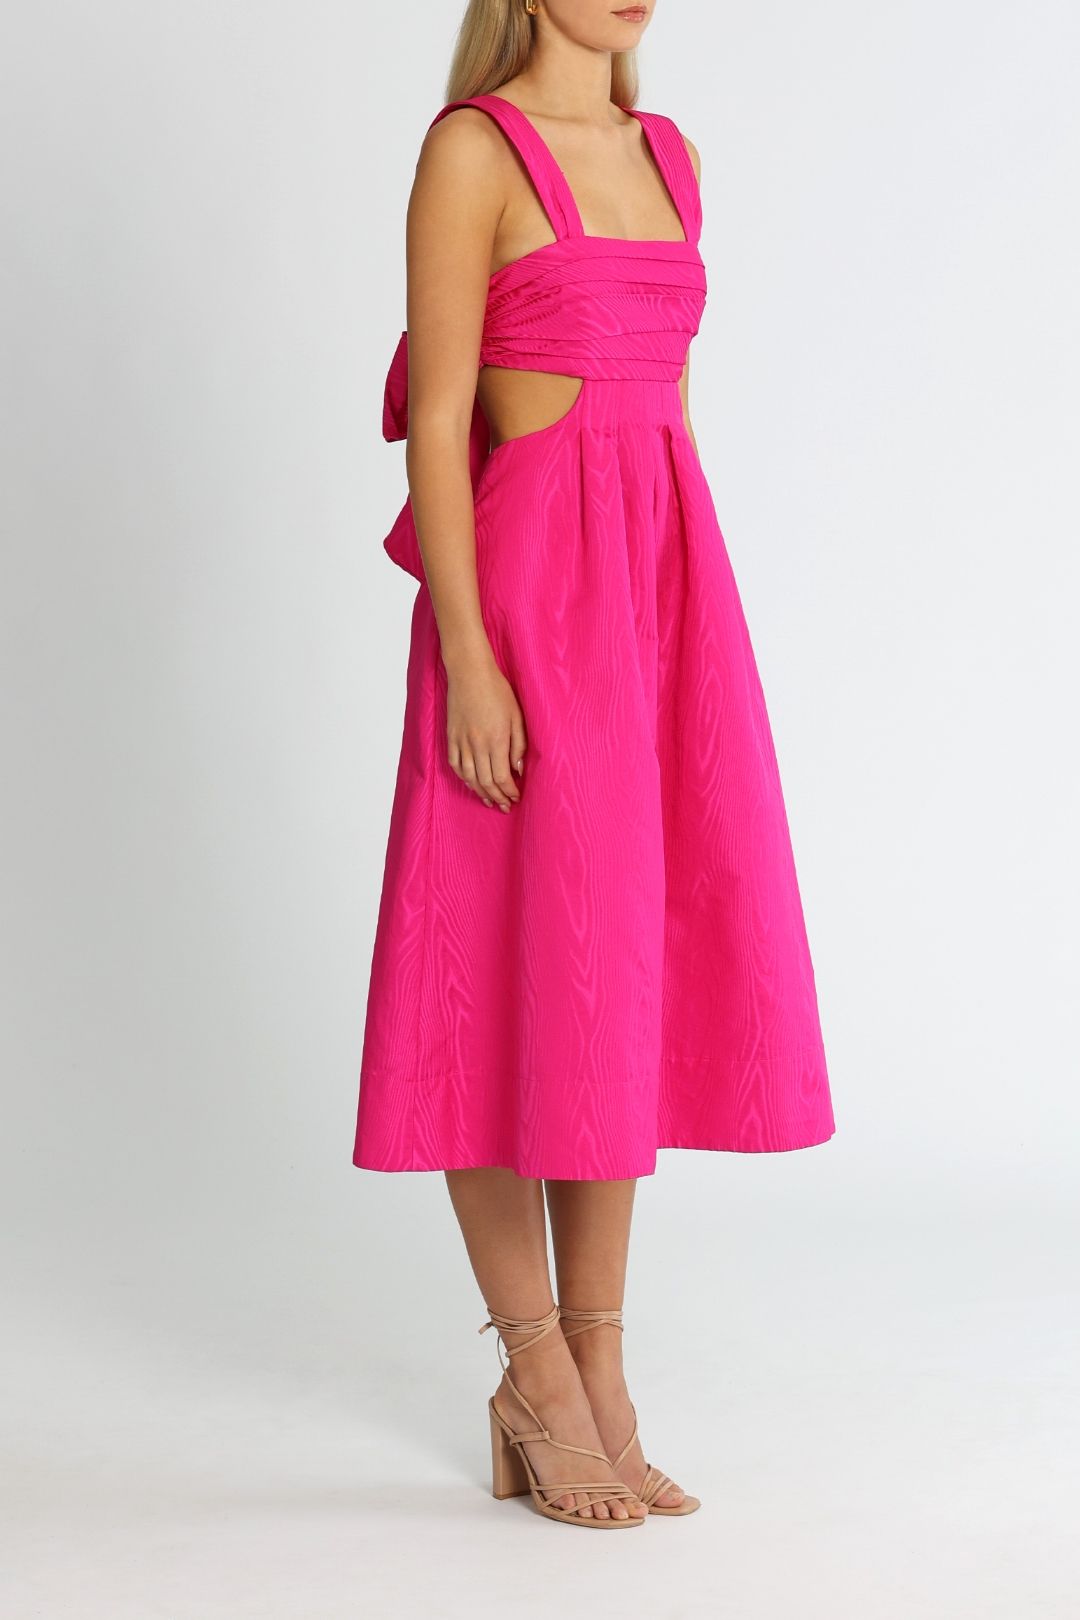 Rebecca Vallance Frenchy Cut Out Midi Pink